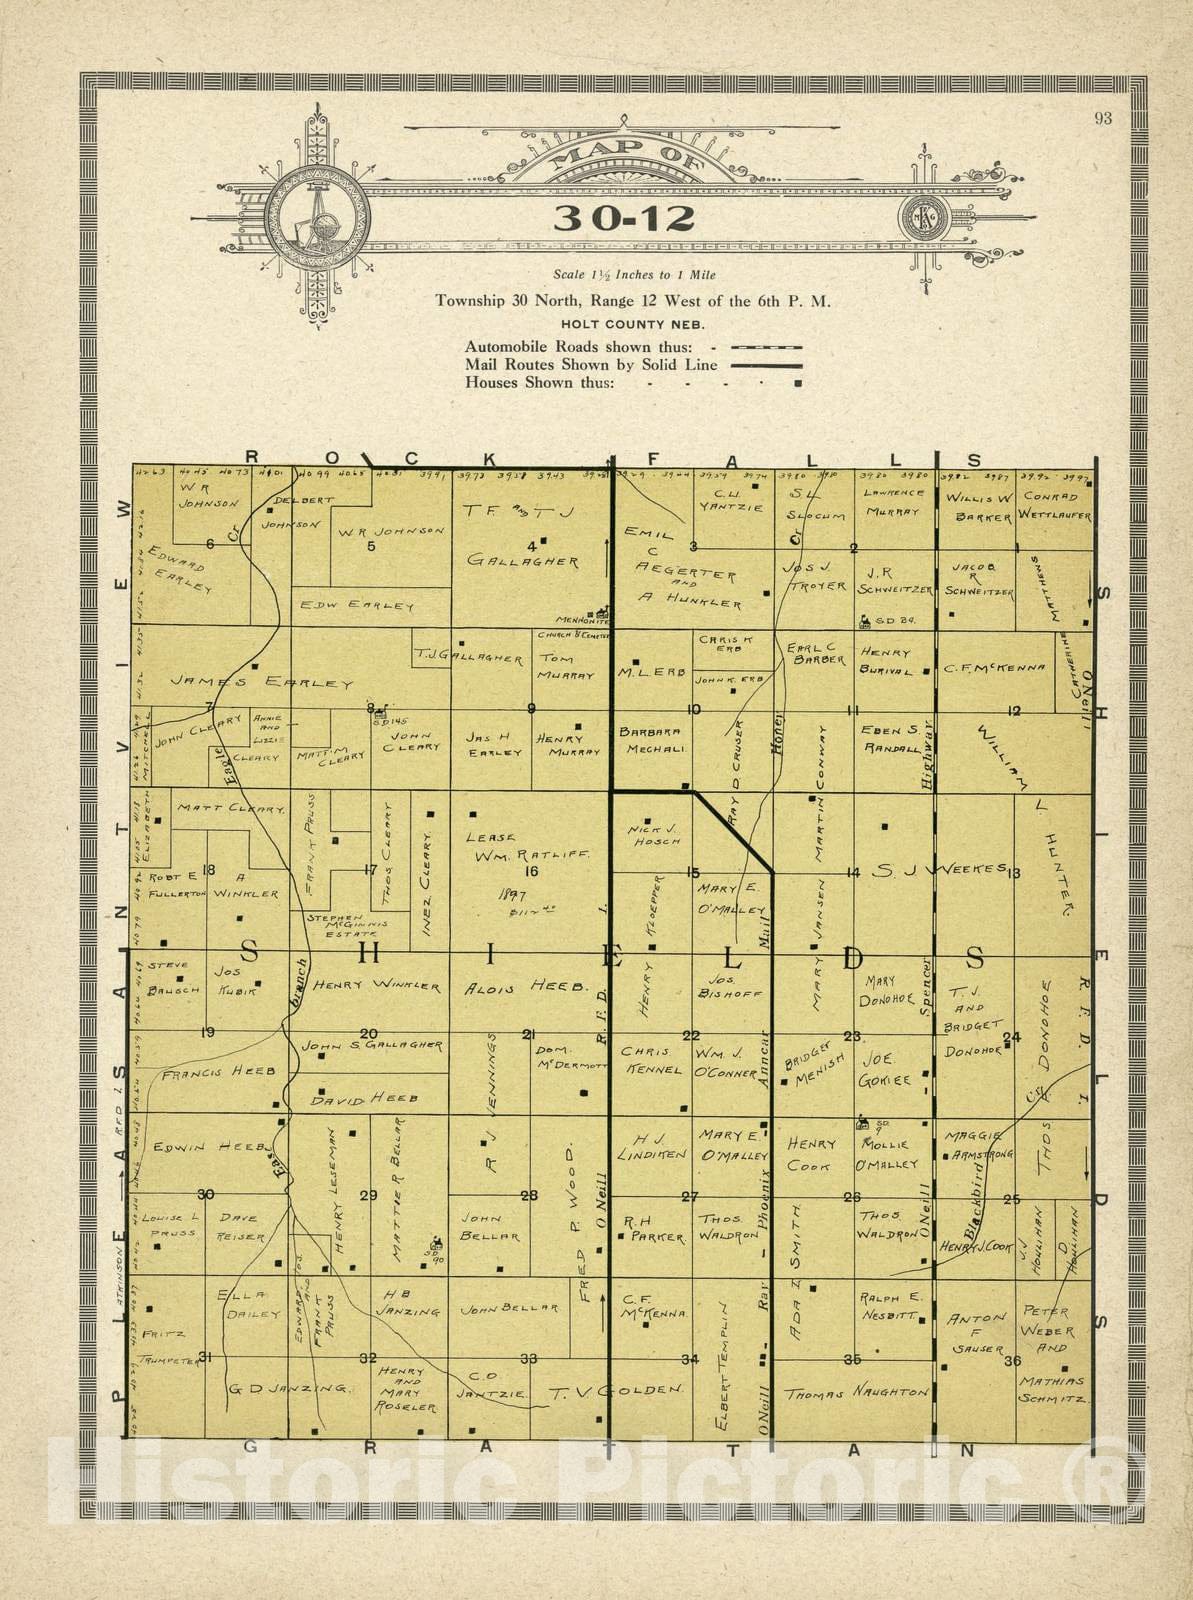 Historic 1915 Map - Atlas and plat Book of Holt County, Nebraska - Map of 30-12 - Standard Atlas and Directory of Holt County, Nebraska